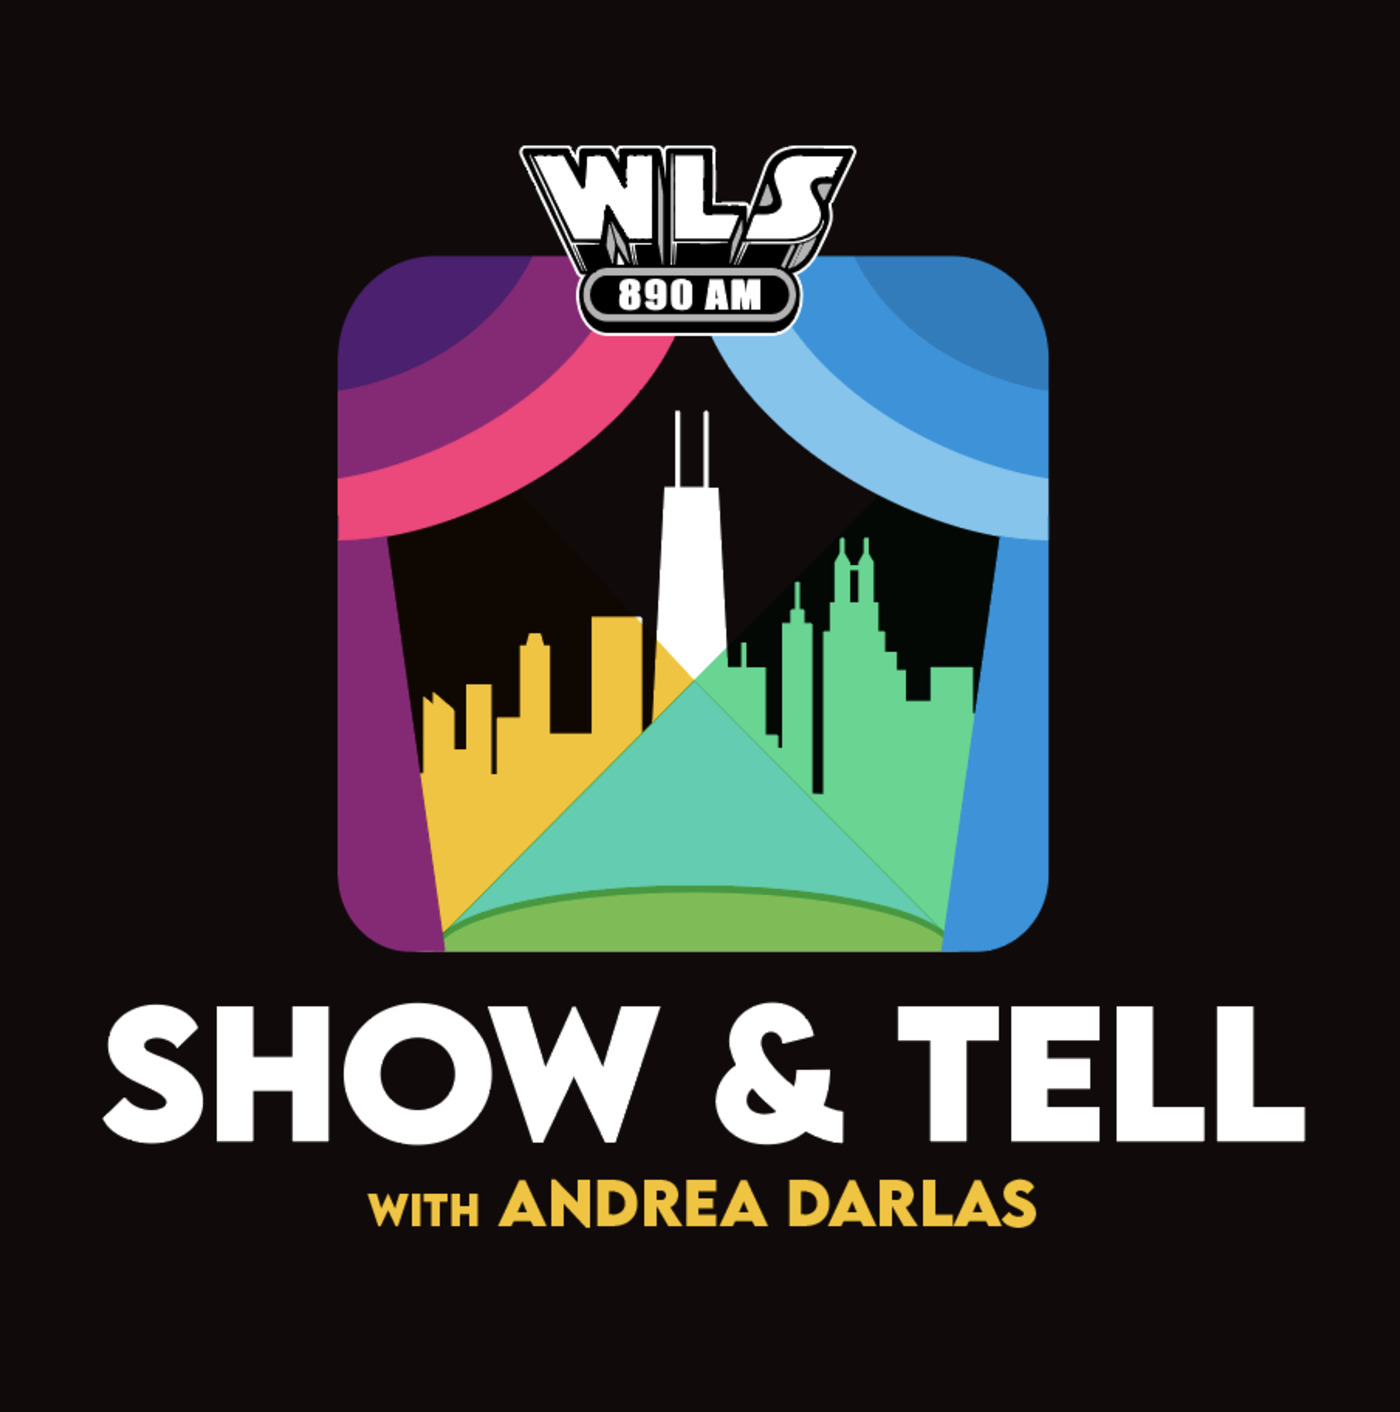 Episode 98: A Mix of Everything Chicago Can Offer…with a Sprinkle of Magic